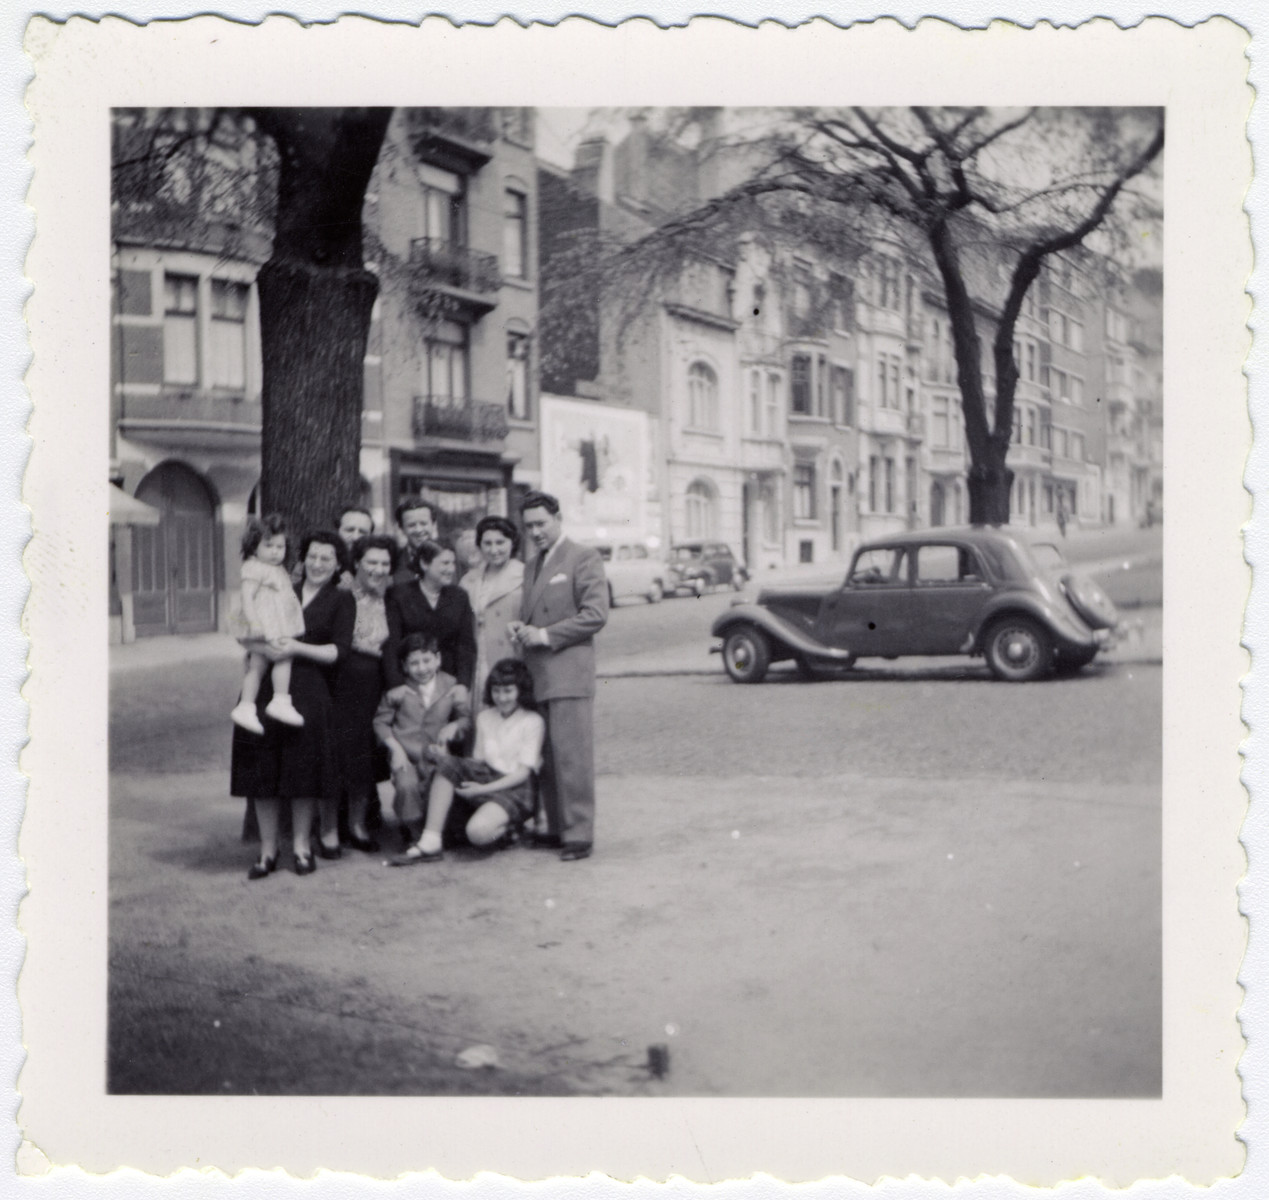 Postwar family photograph of the Sephiha family standing on a sidewalk in Brussels.

On the left is Germaine Sephiha holding Claudine Ariel, Adele Sephia Ascagno, Jacqueline Wolff, Elise Ariel, and Albert Sephia.  In front are Raymond and Monique Ariel, and in back are Elie Ariel and Guelfi Ascagno.